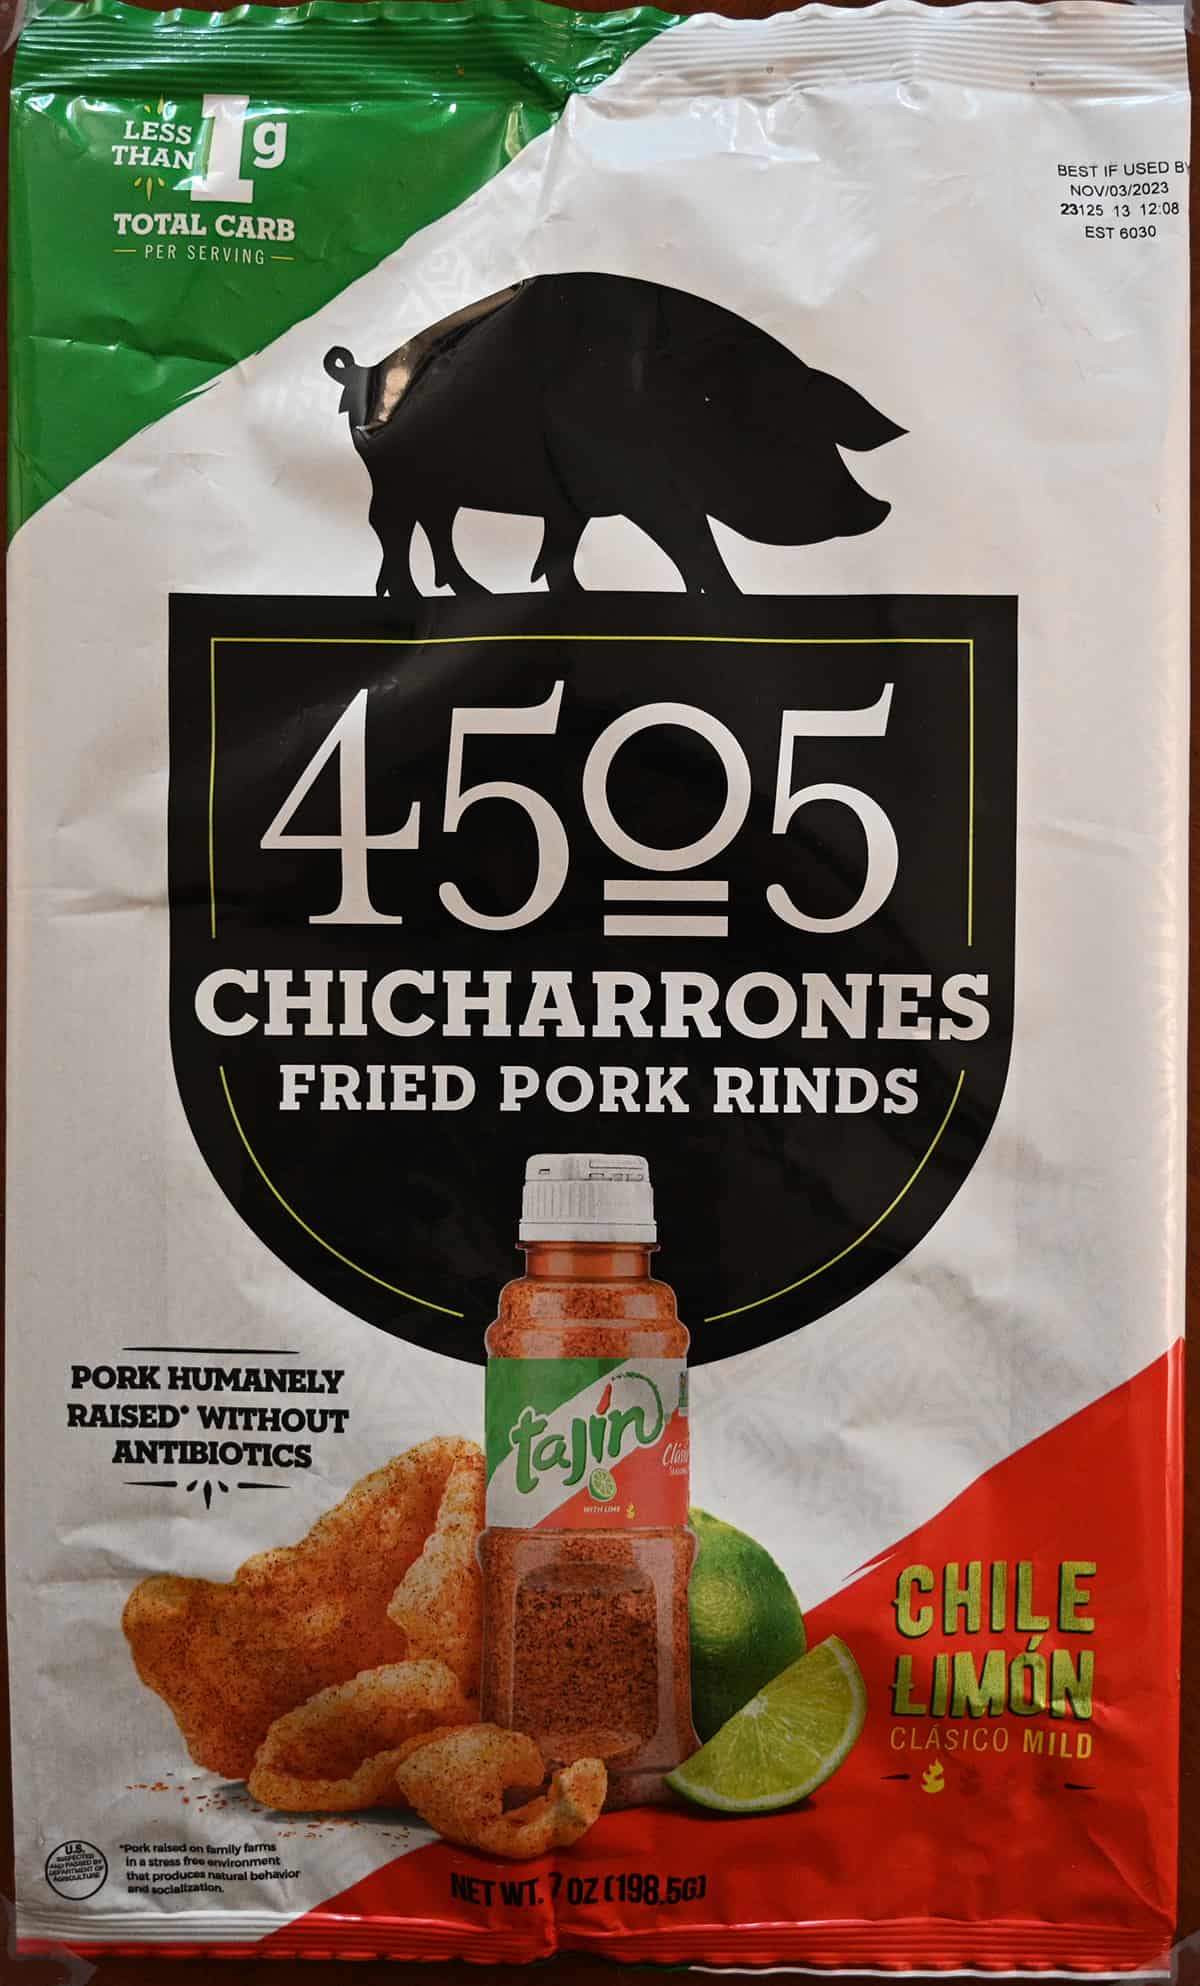 Closeup image of the front of the 4505 Chicharrones bag showing that the pork is humanely raised without antibiotics.